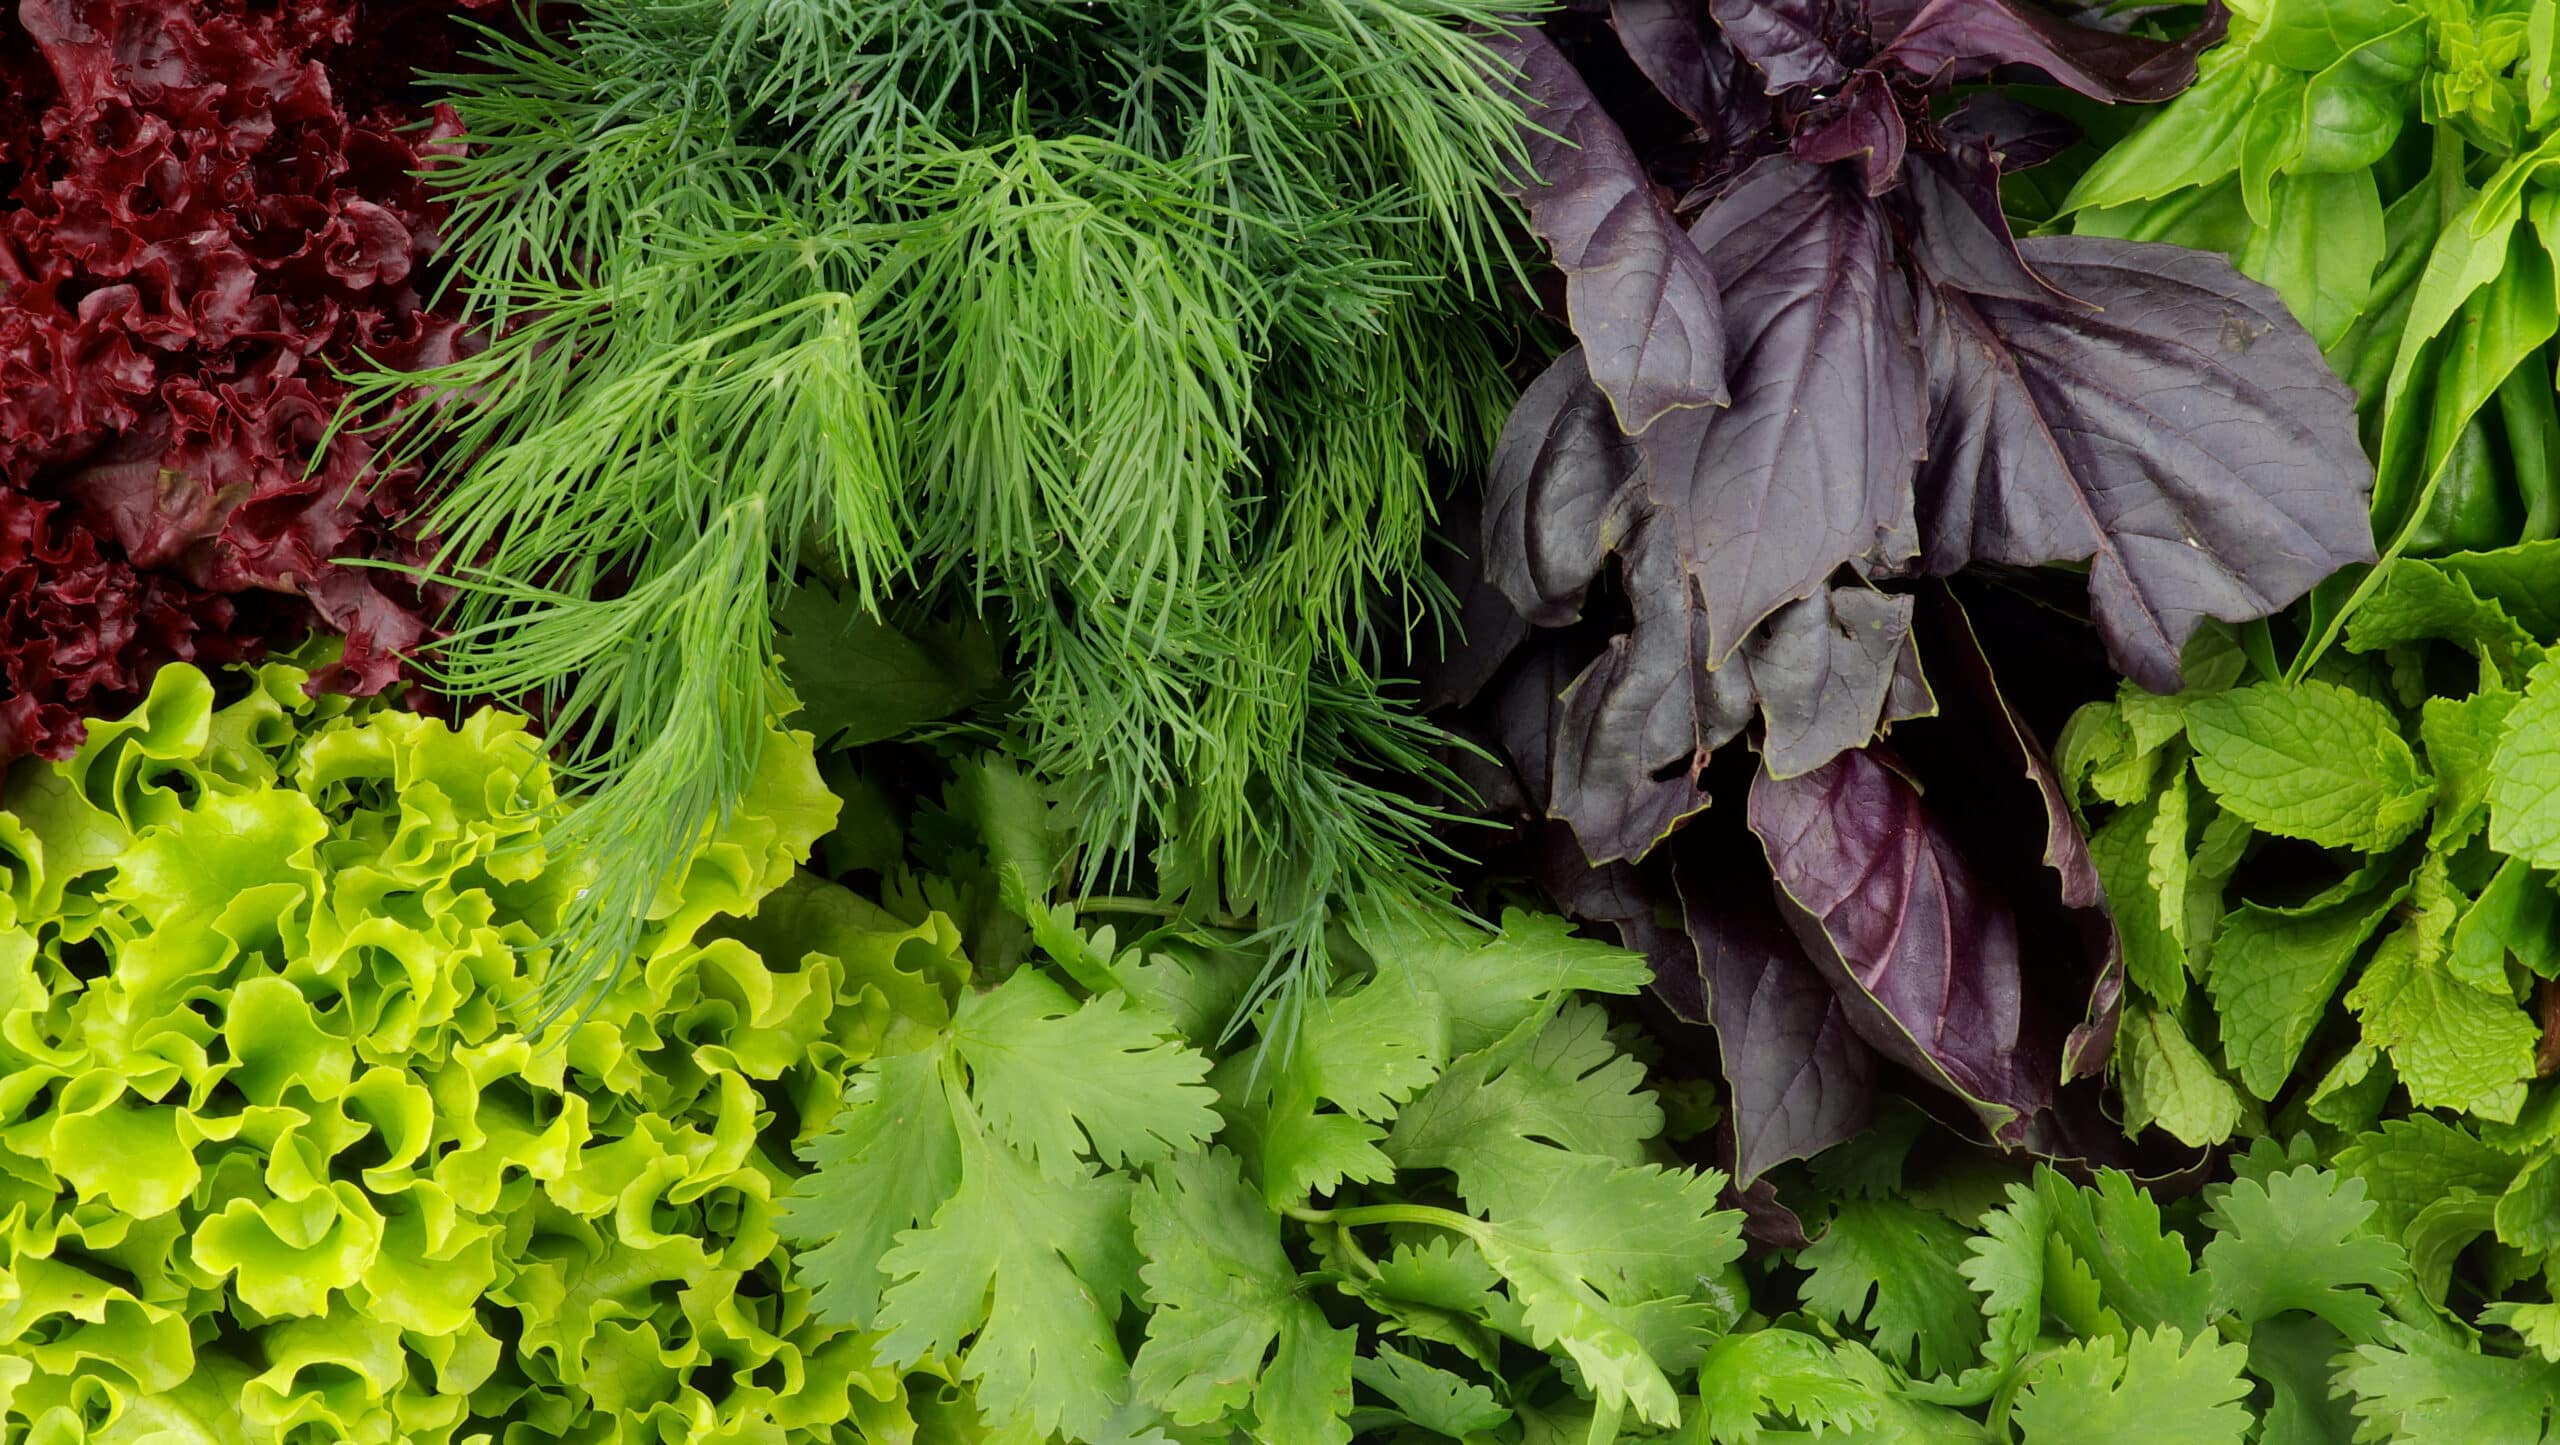 Image of common leafy green vegetables